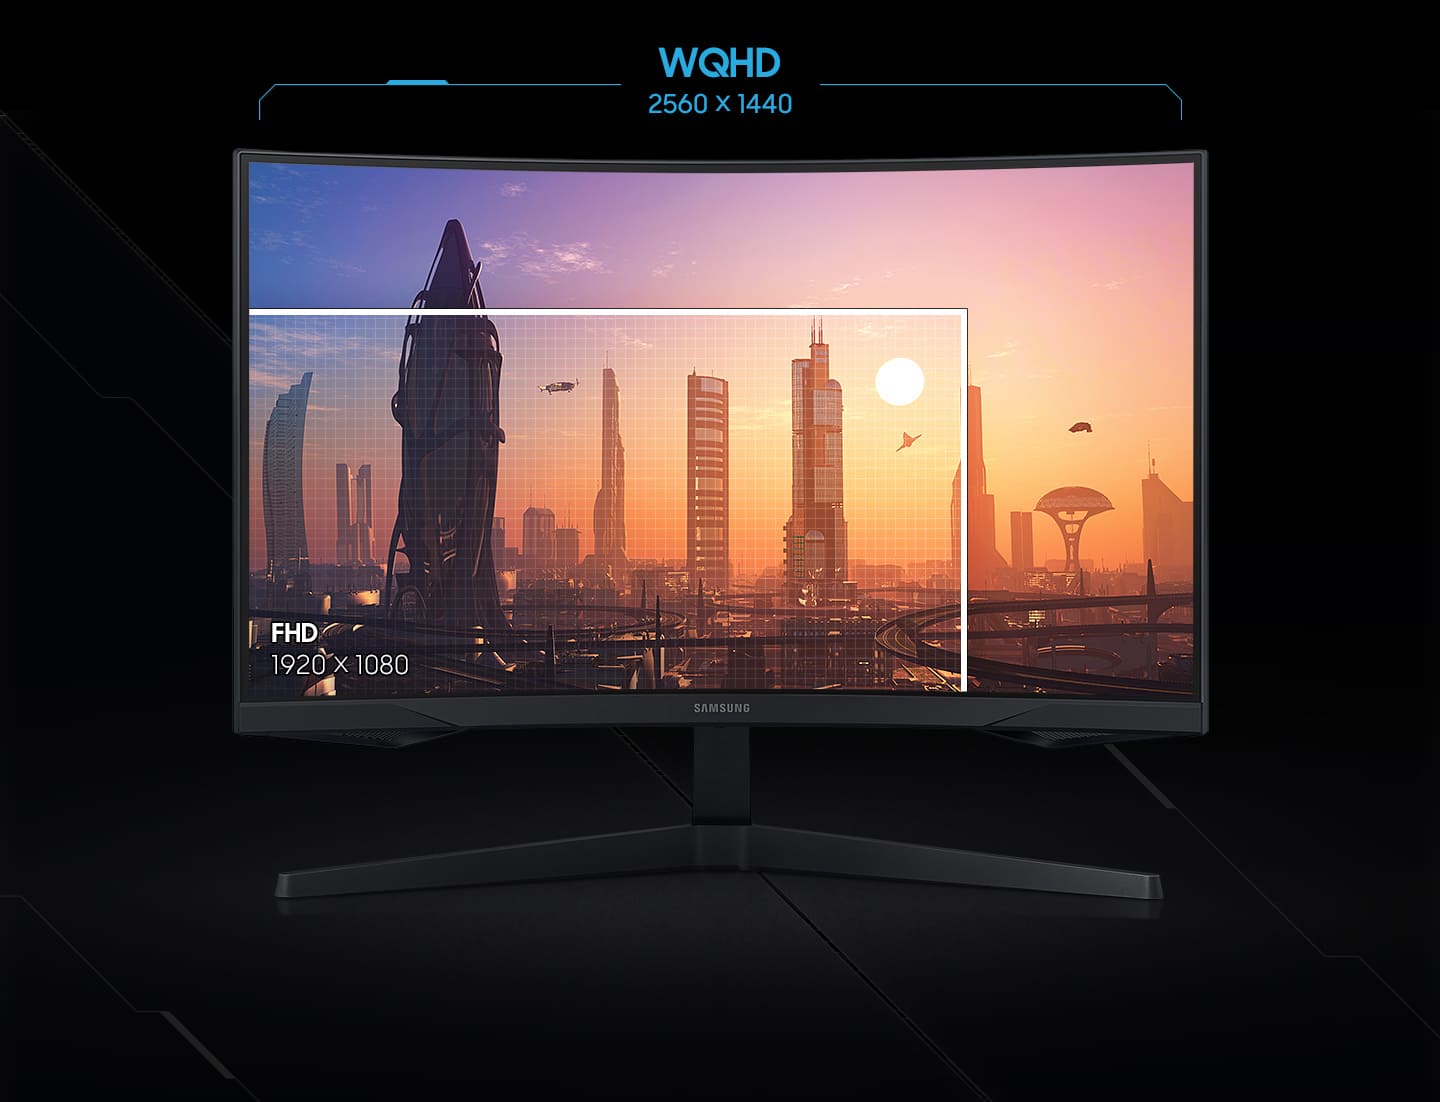 SAMSUNG Curved Gaming Monitor with WQHD resolution